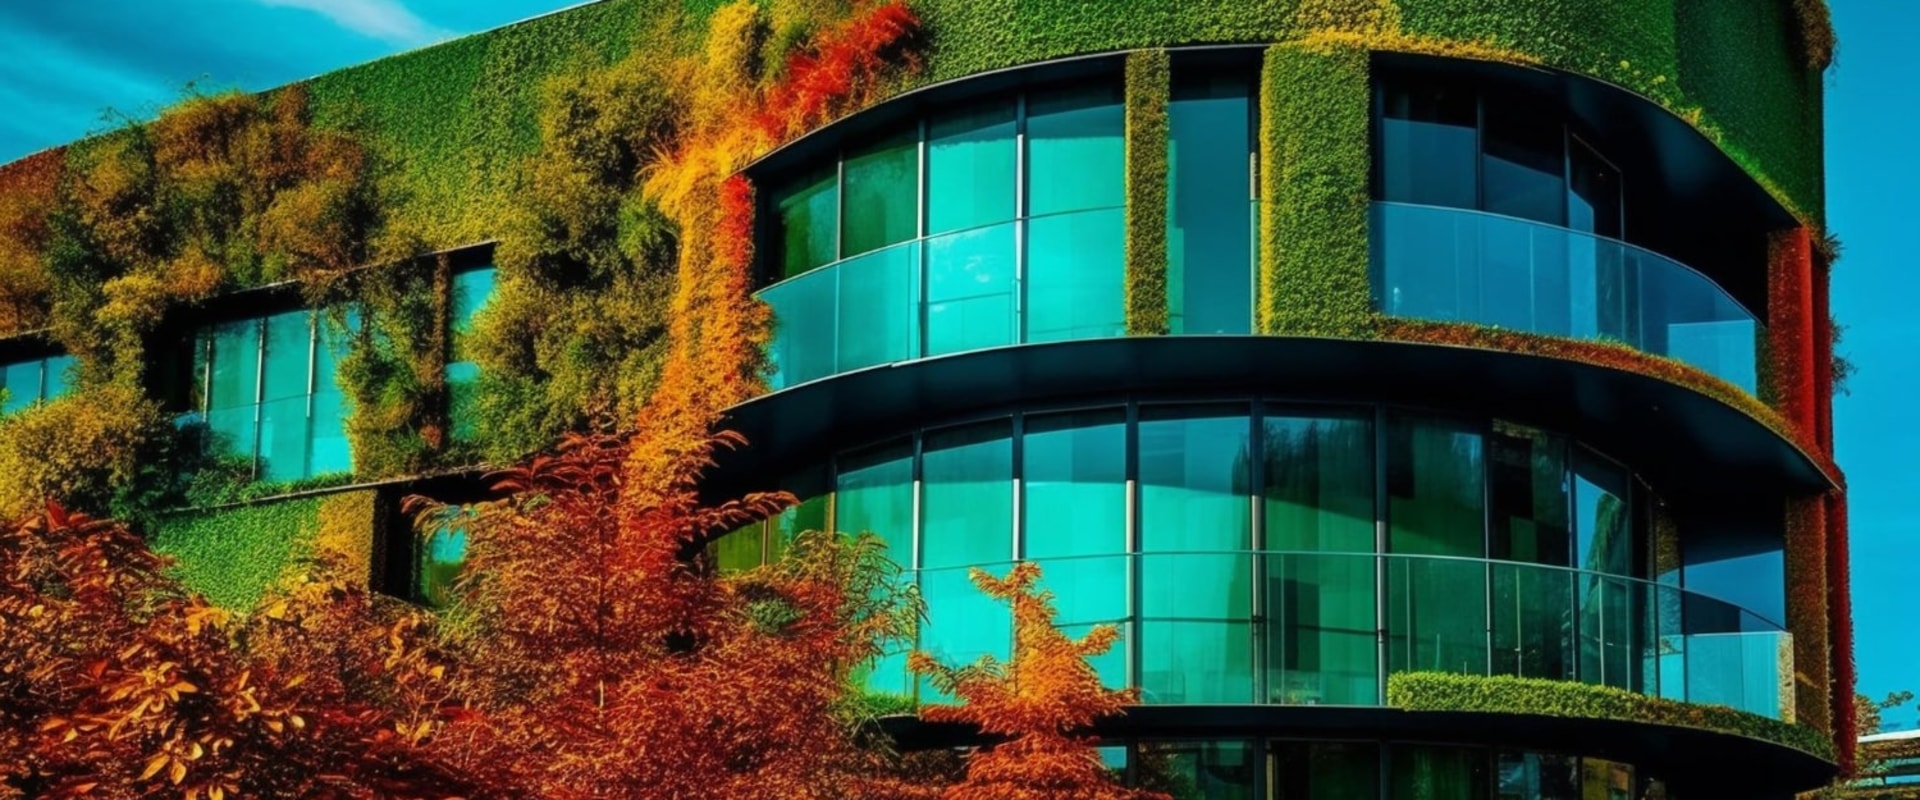 LEED Certification: How to Make Your Home or Building More Environmentally Friendly